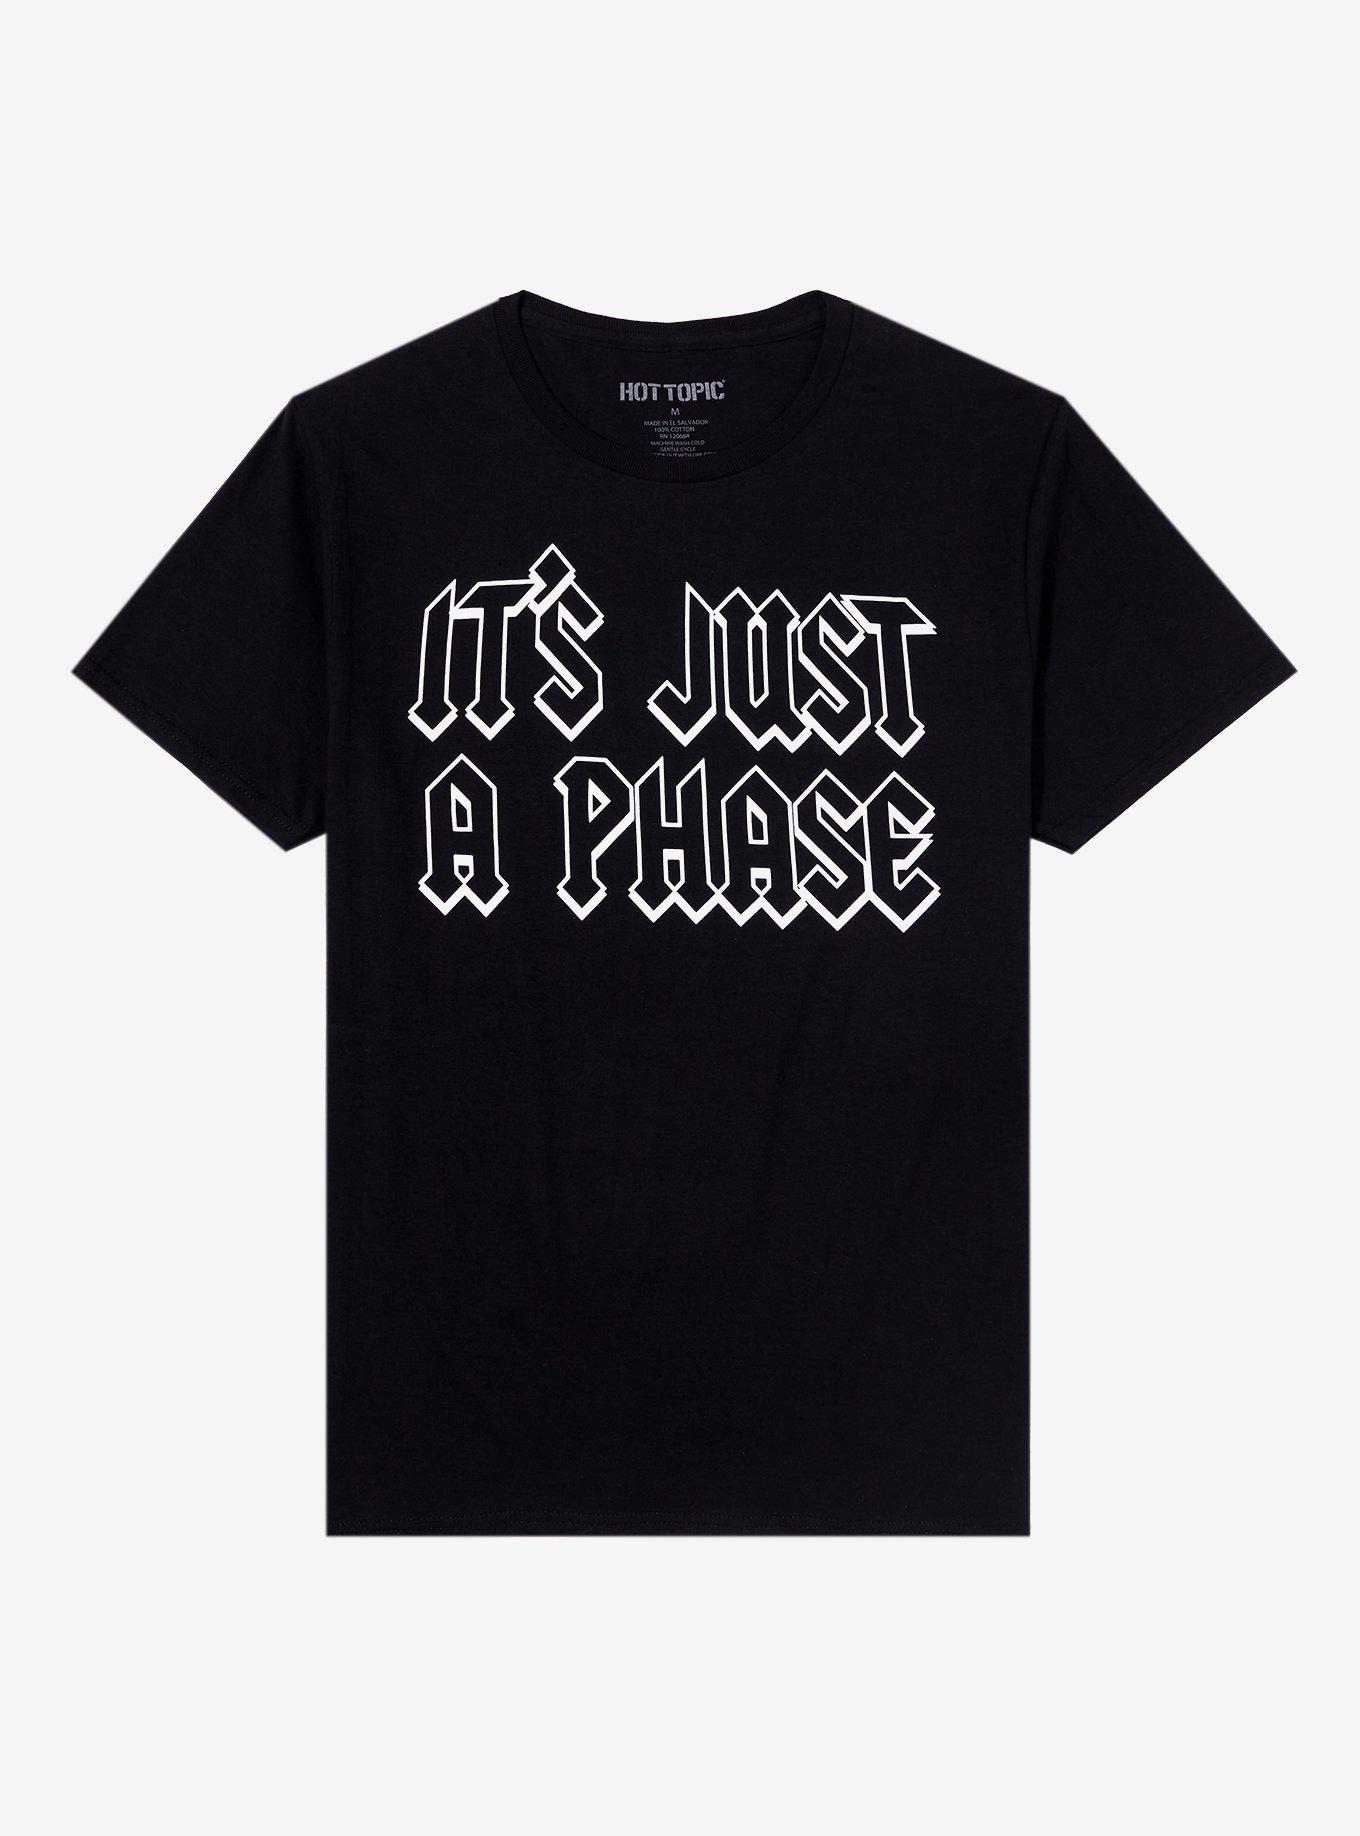 It's Just A Phase T-Shirt